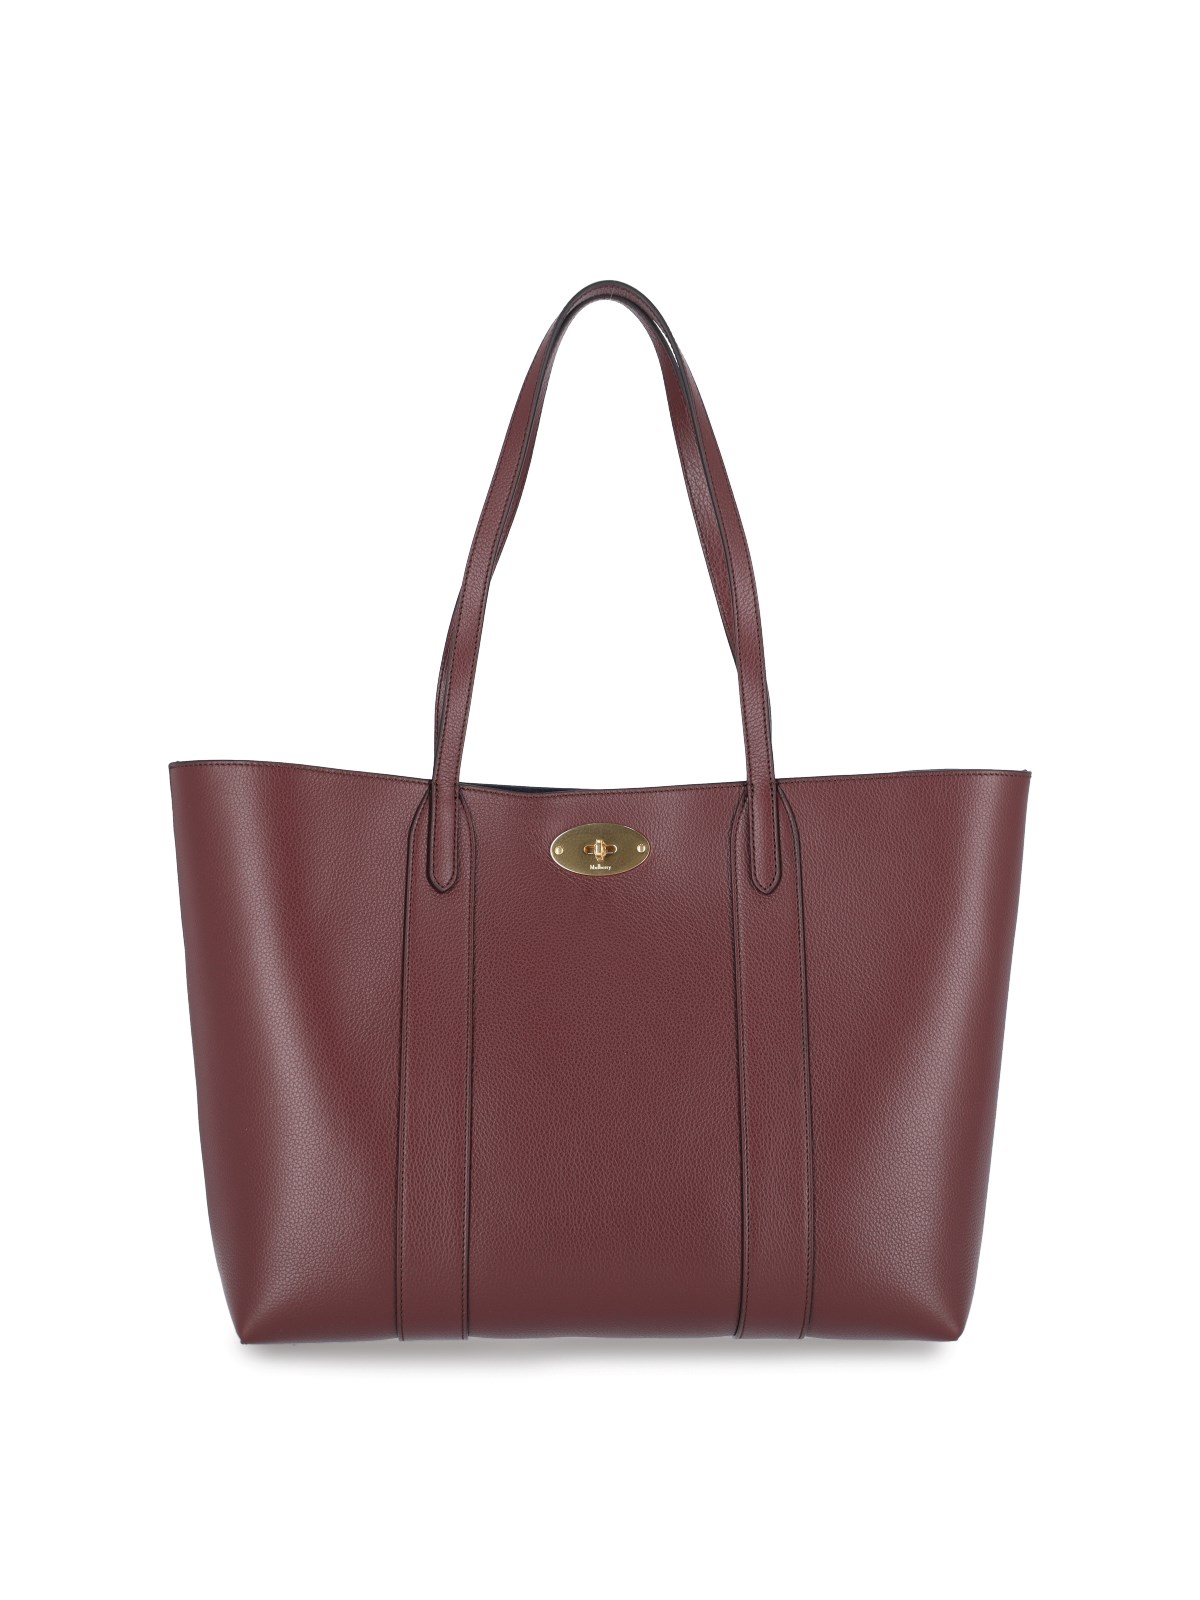 Mulberry 'bayswater' Tote Bag In Marrone